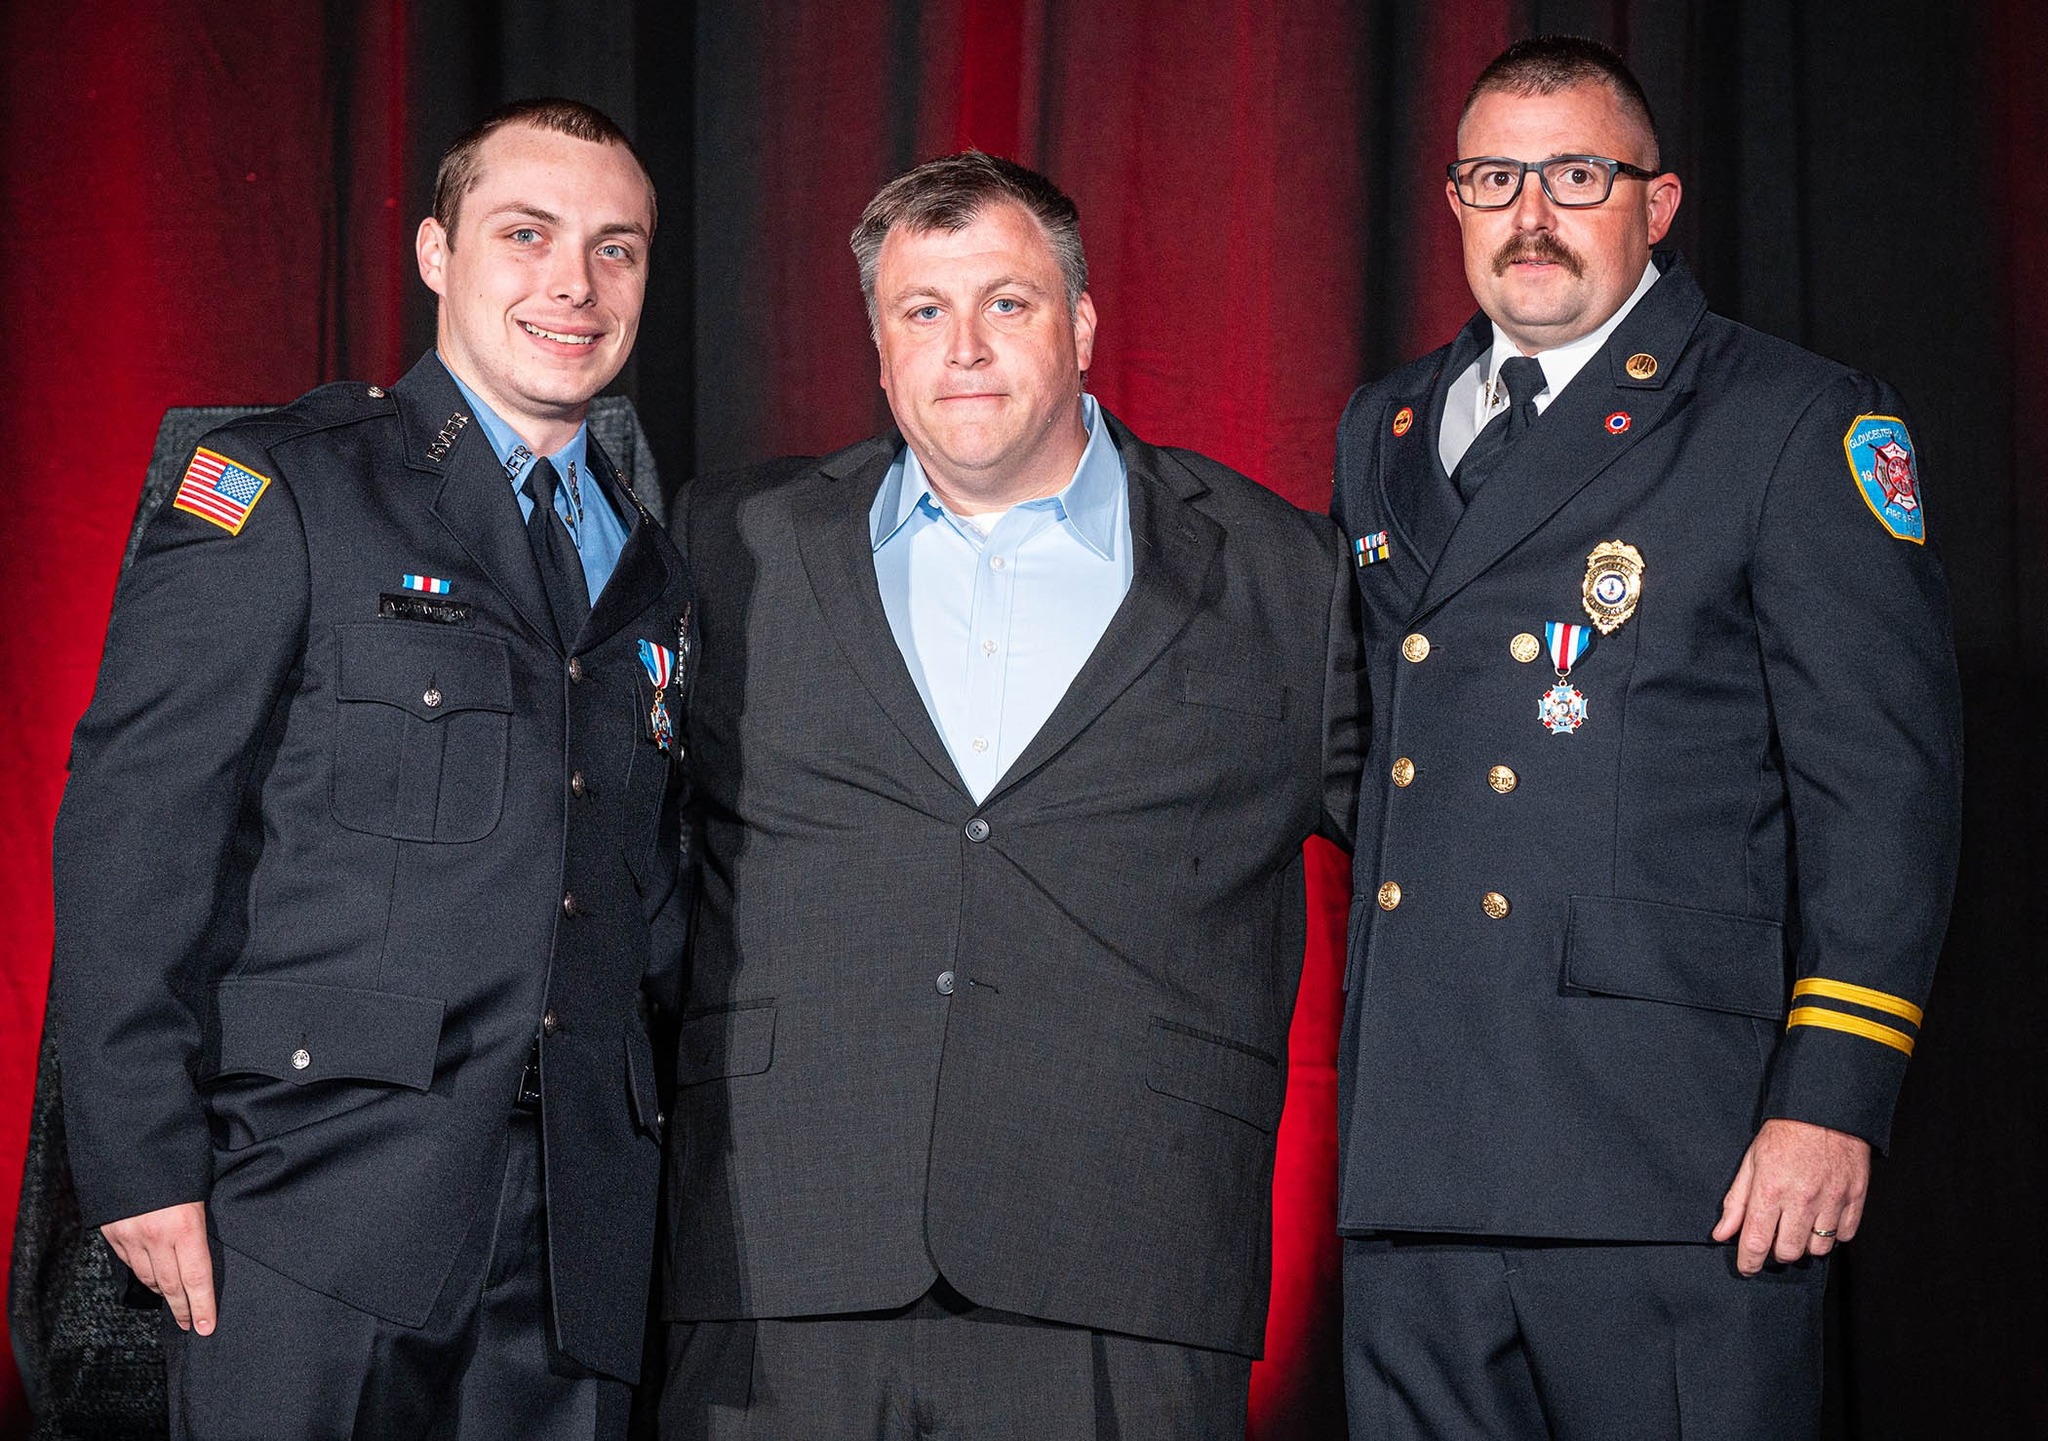 record gloucester vfrs members awarded